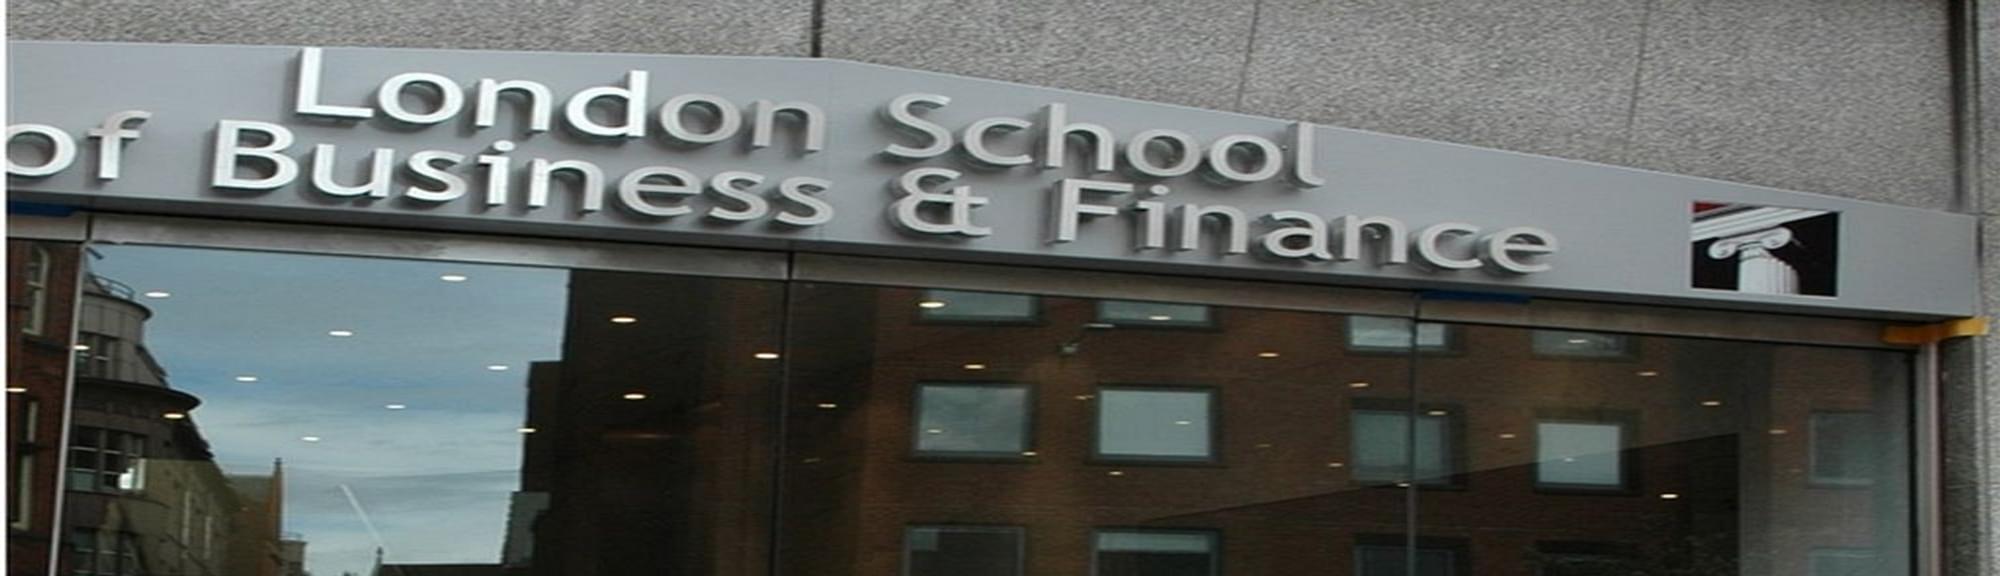 London School Of Business And Finance [LSBF], London Courses, Fees,  Ranking, & Admission Criteria